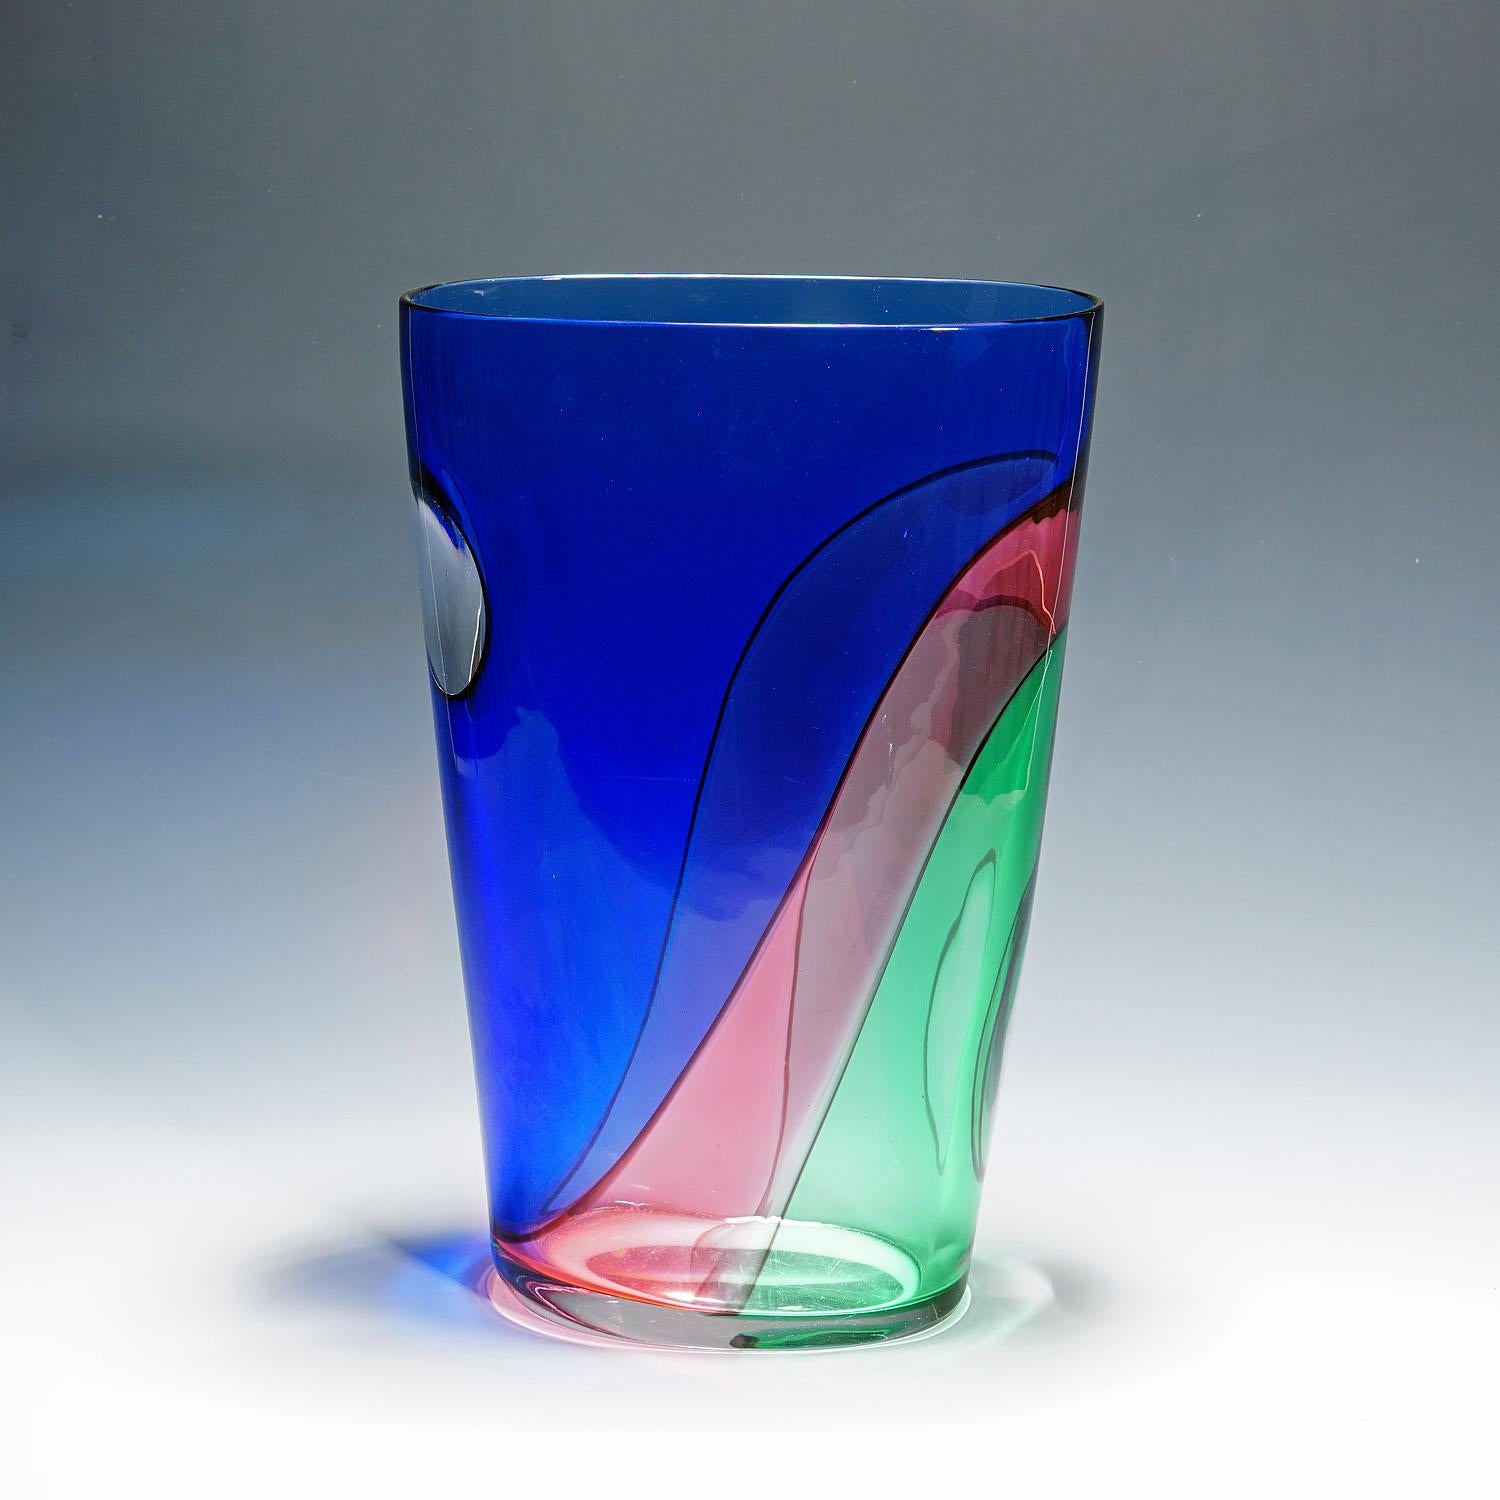 Large Carnevale Vase by Vetreria Archimede Seguso ca. 1980s

A very large vintage art glass vase of the Carnevale series introduced by Archimede Seguso in 1987. Manufactured by Vetreria Archimede Seguso. Clear glass with overlapping blue, green and